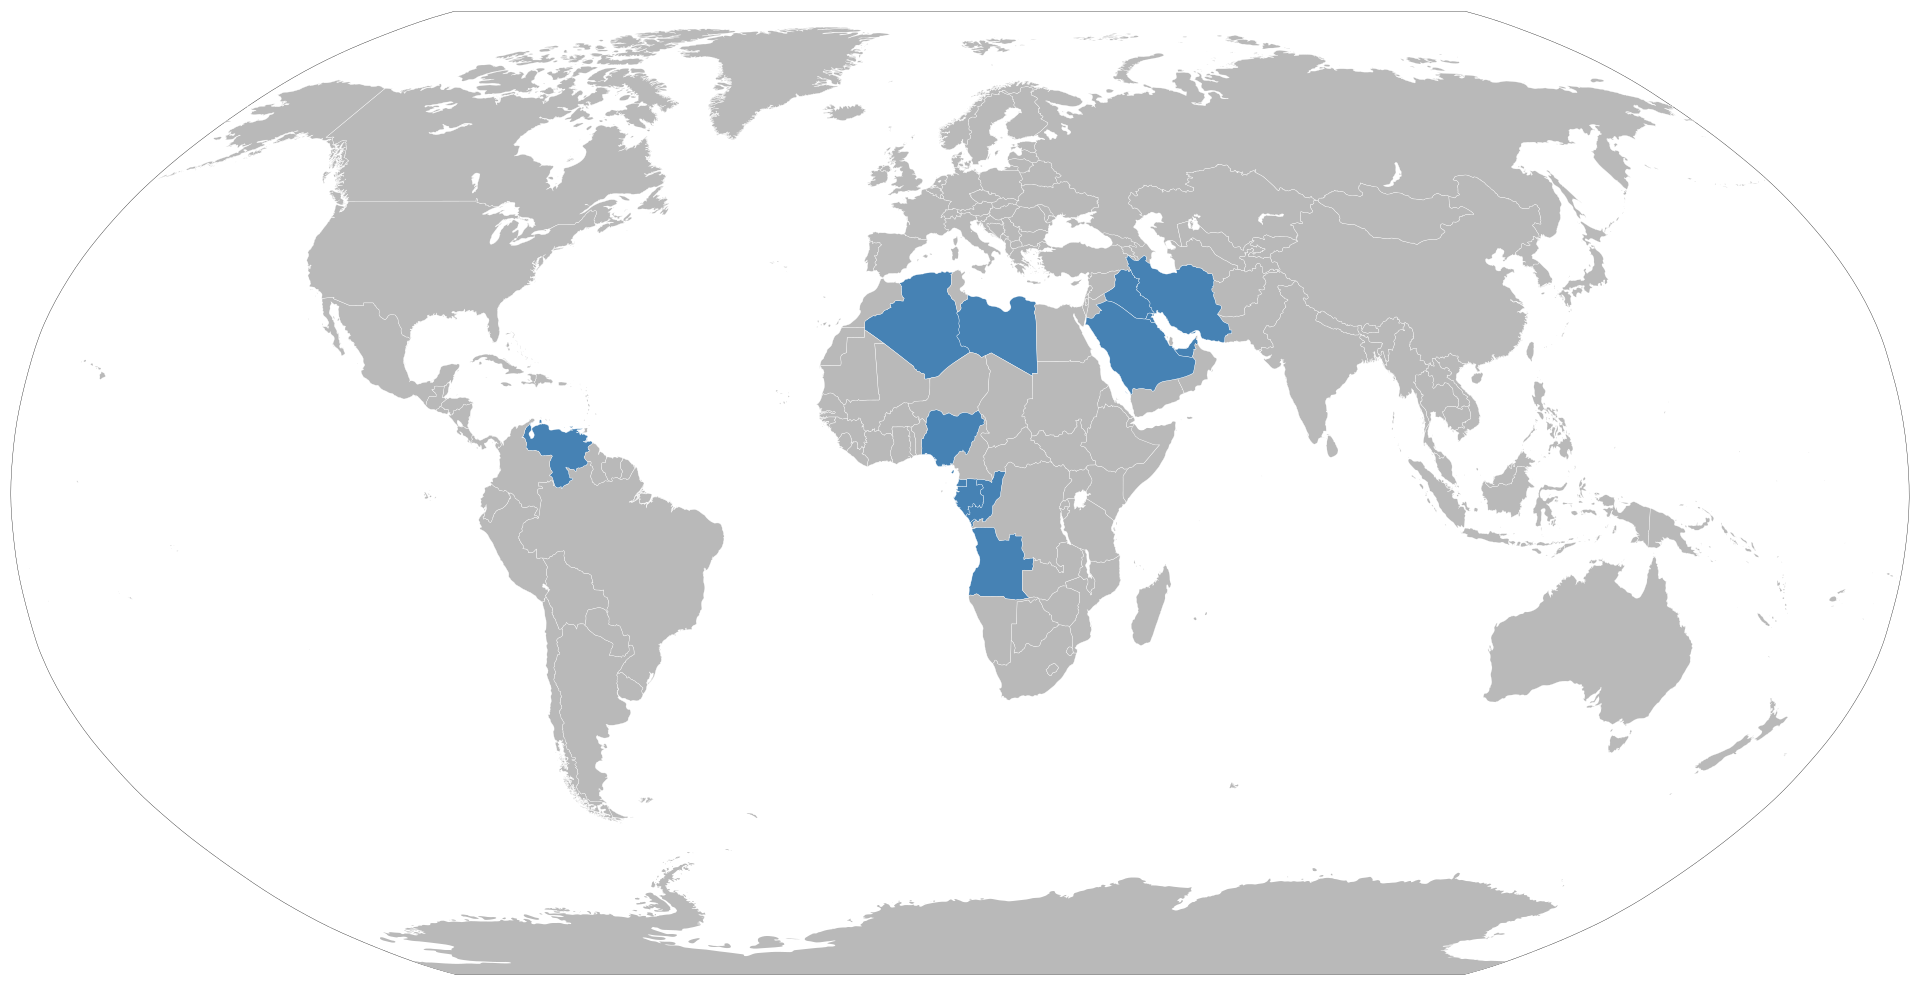 Map of OPEC member countries